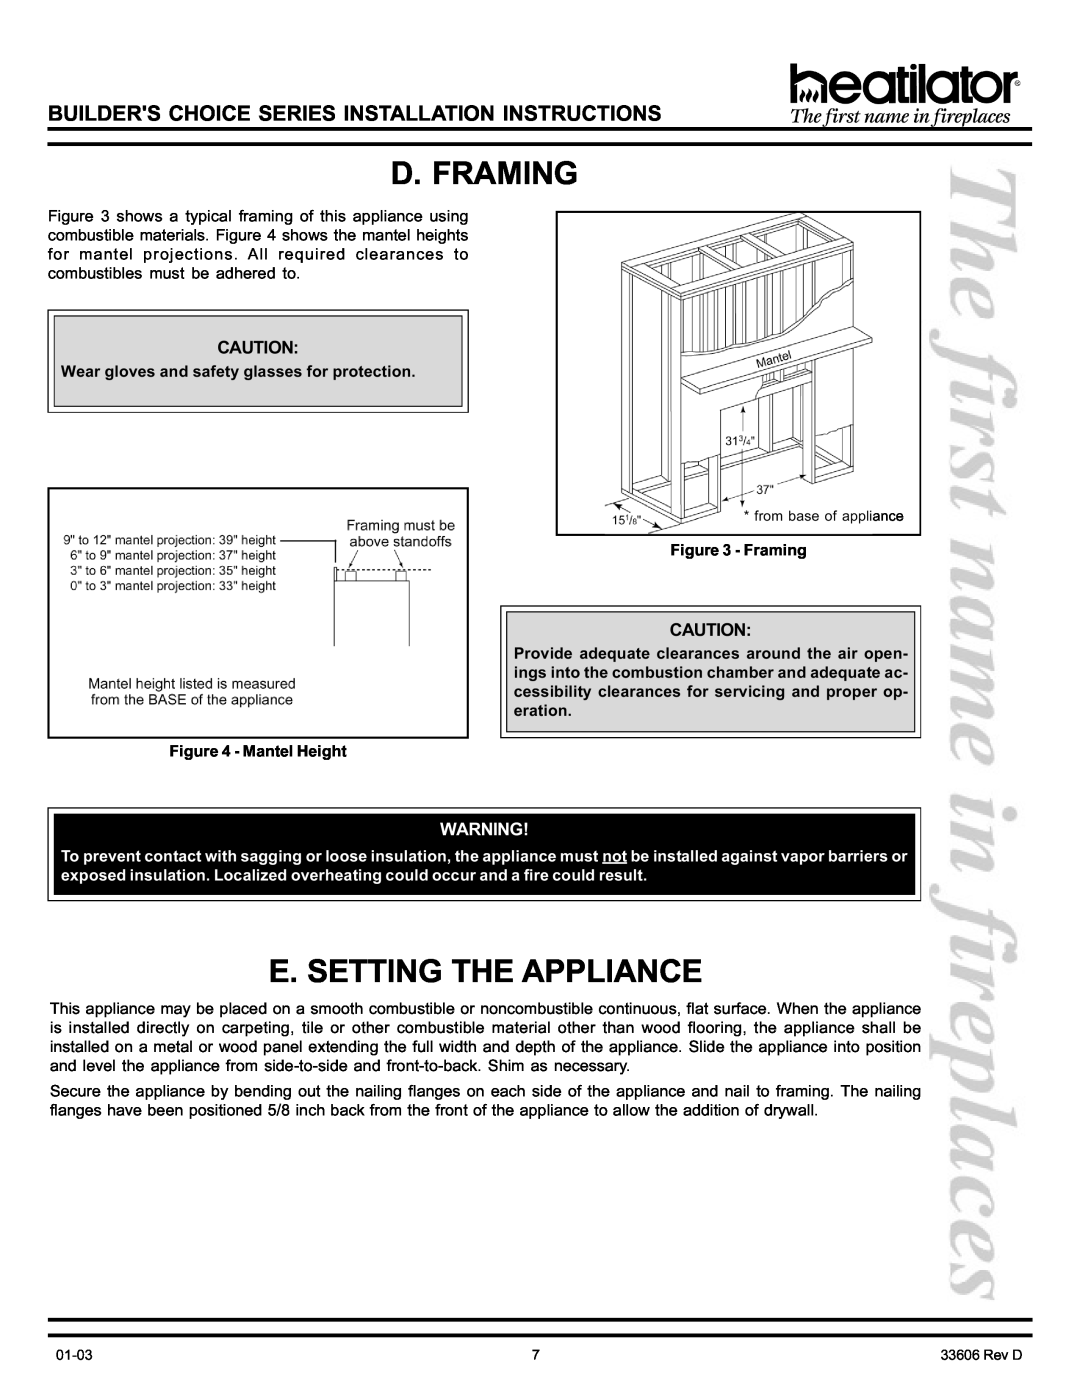 Heatiator BCDV36 manual D. Framing, E. Setting The Appliance, Wear gloves and safety glasses for protection, Mantel Height 